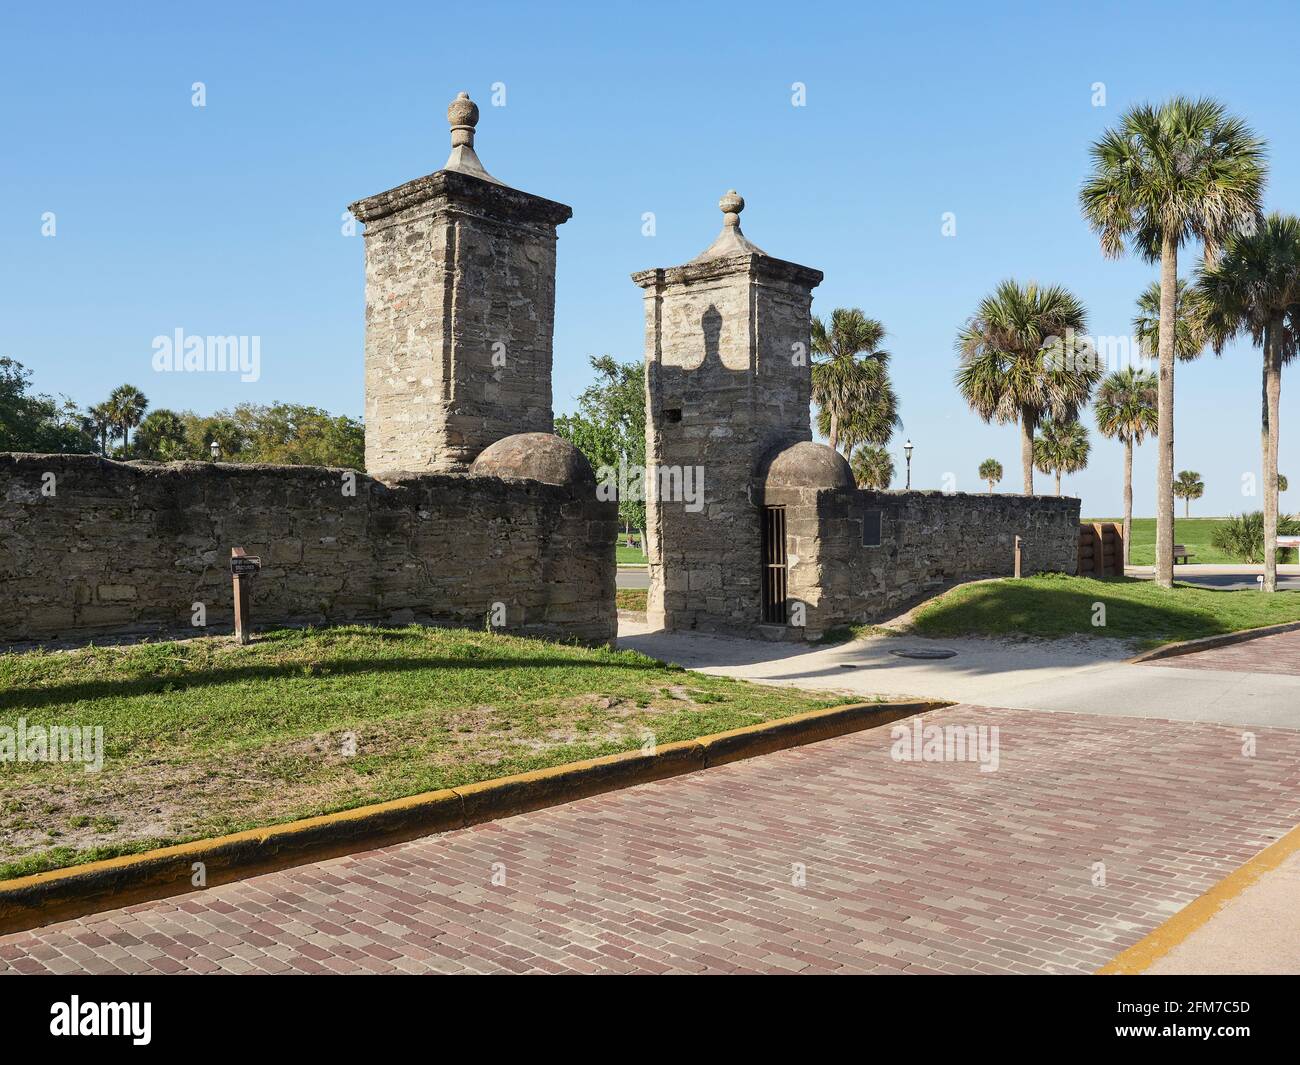 Old Town City Gate which is the original gates to the first Spanish settlement in America, St Augustine Florida, USA. Stock Photo